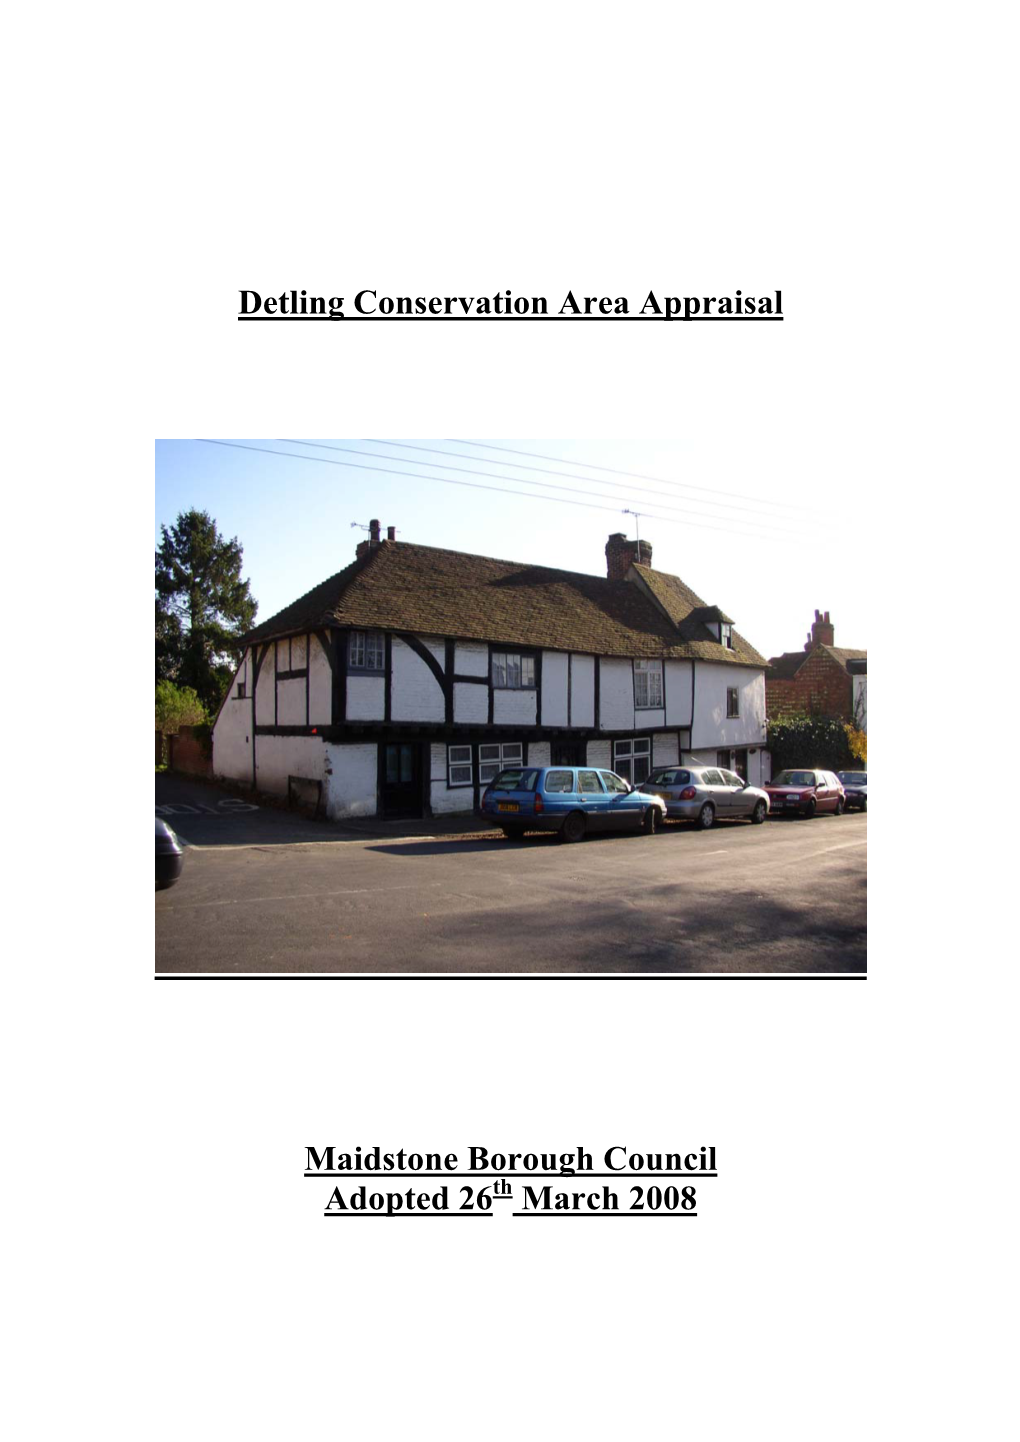 Detling Conservation Area Character Appraisal